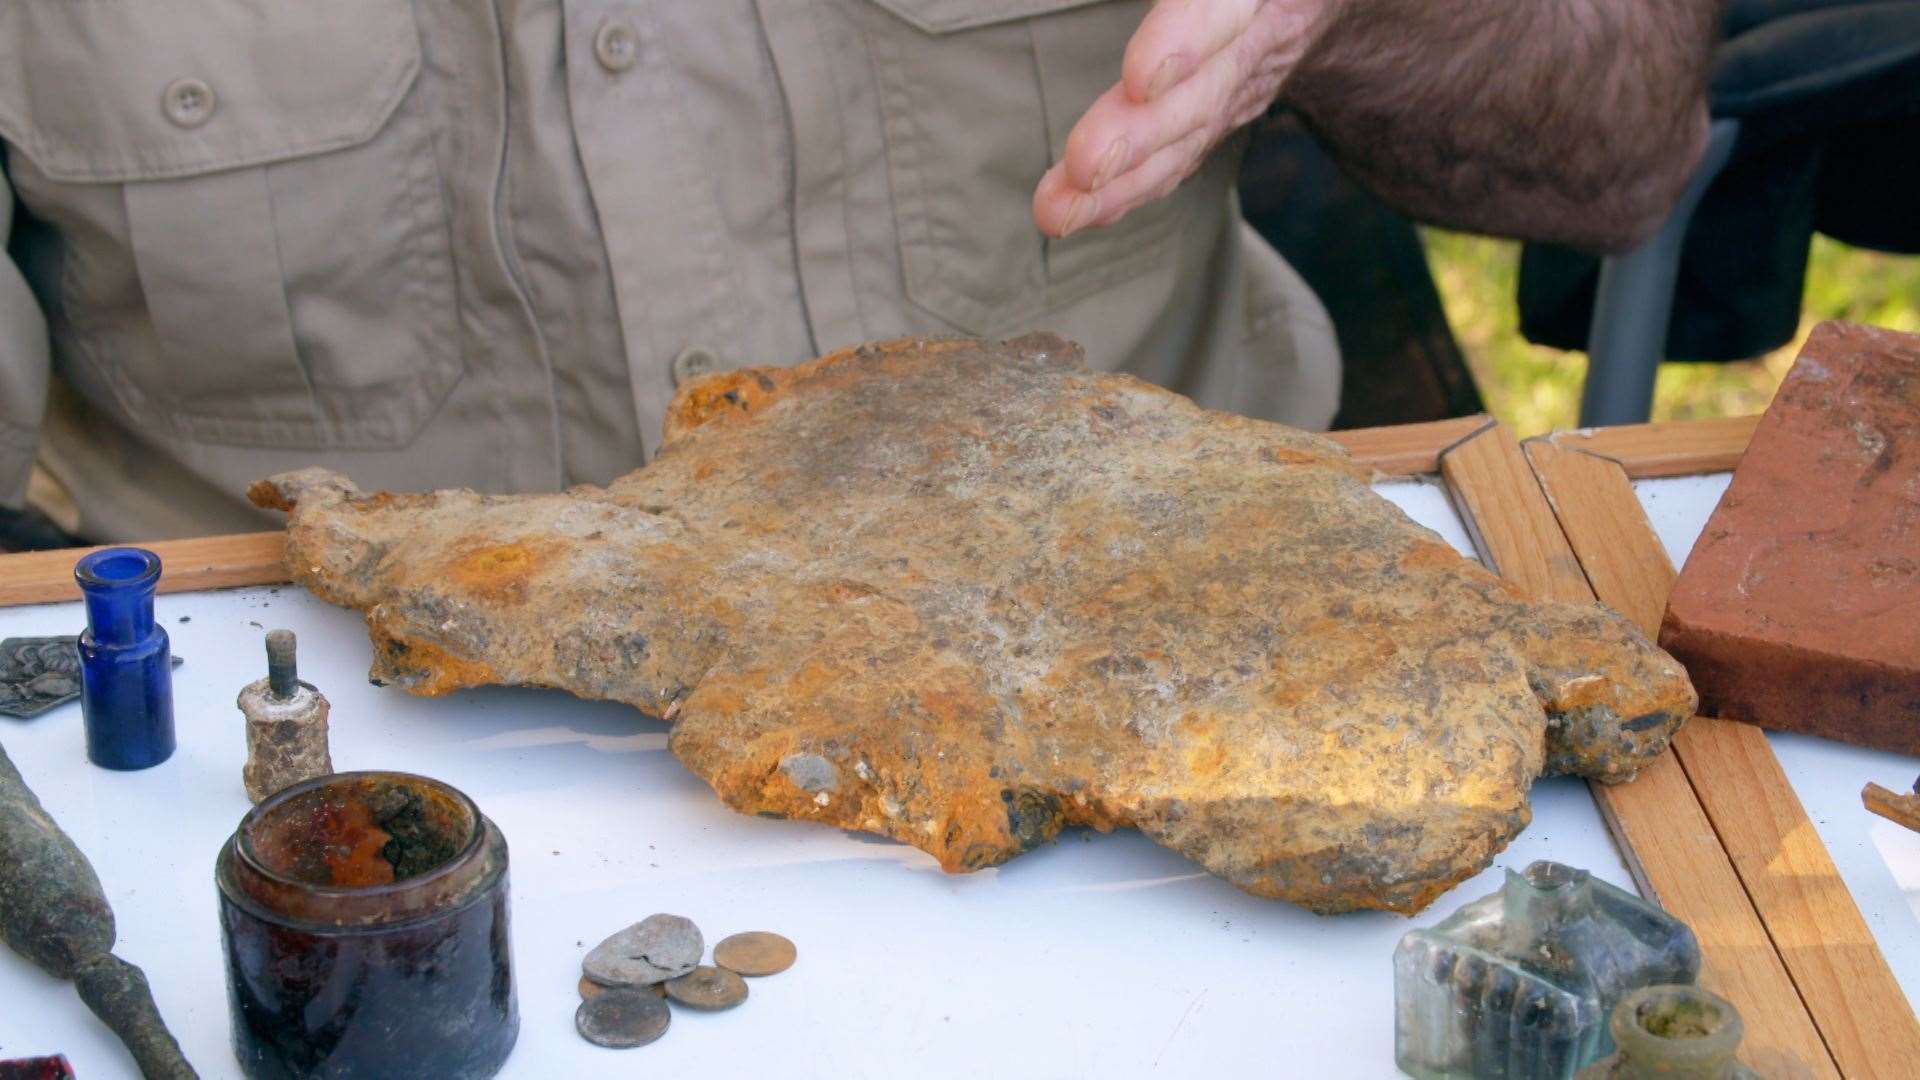 A large bomb fragment from the Second World War was pulled from the river